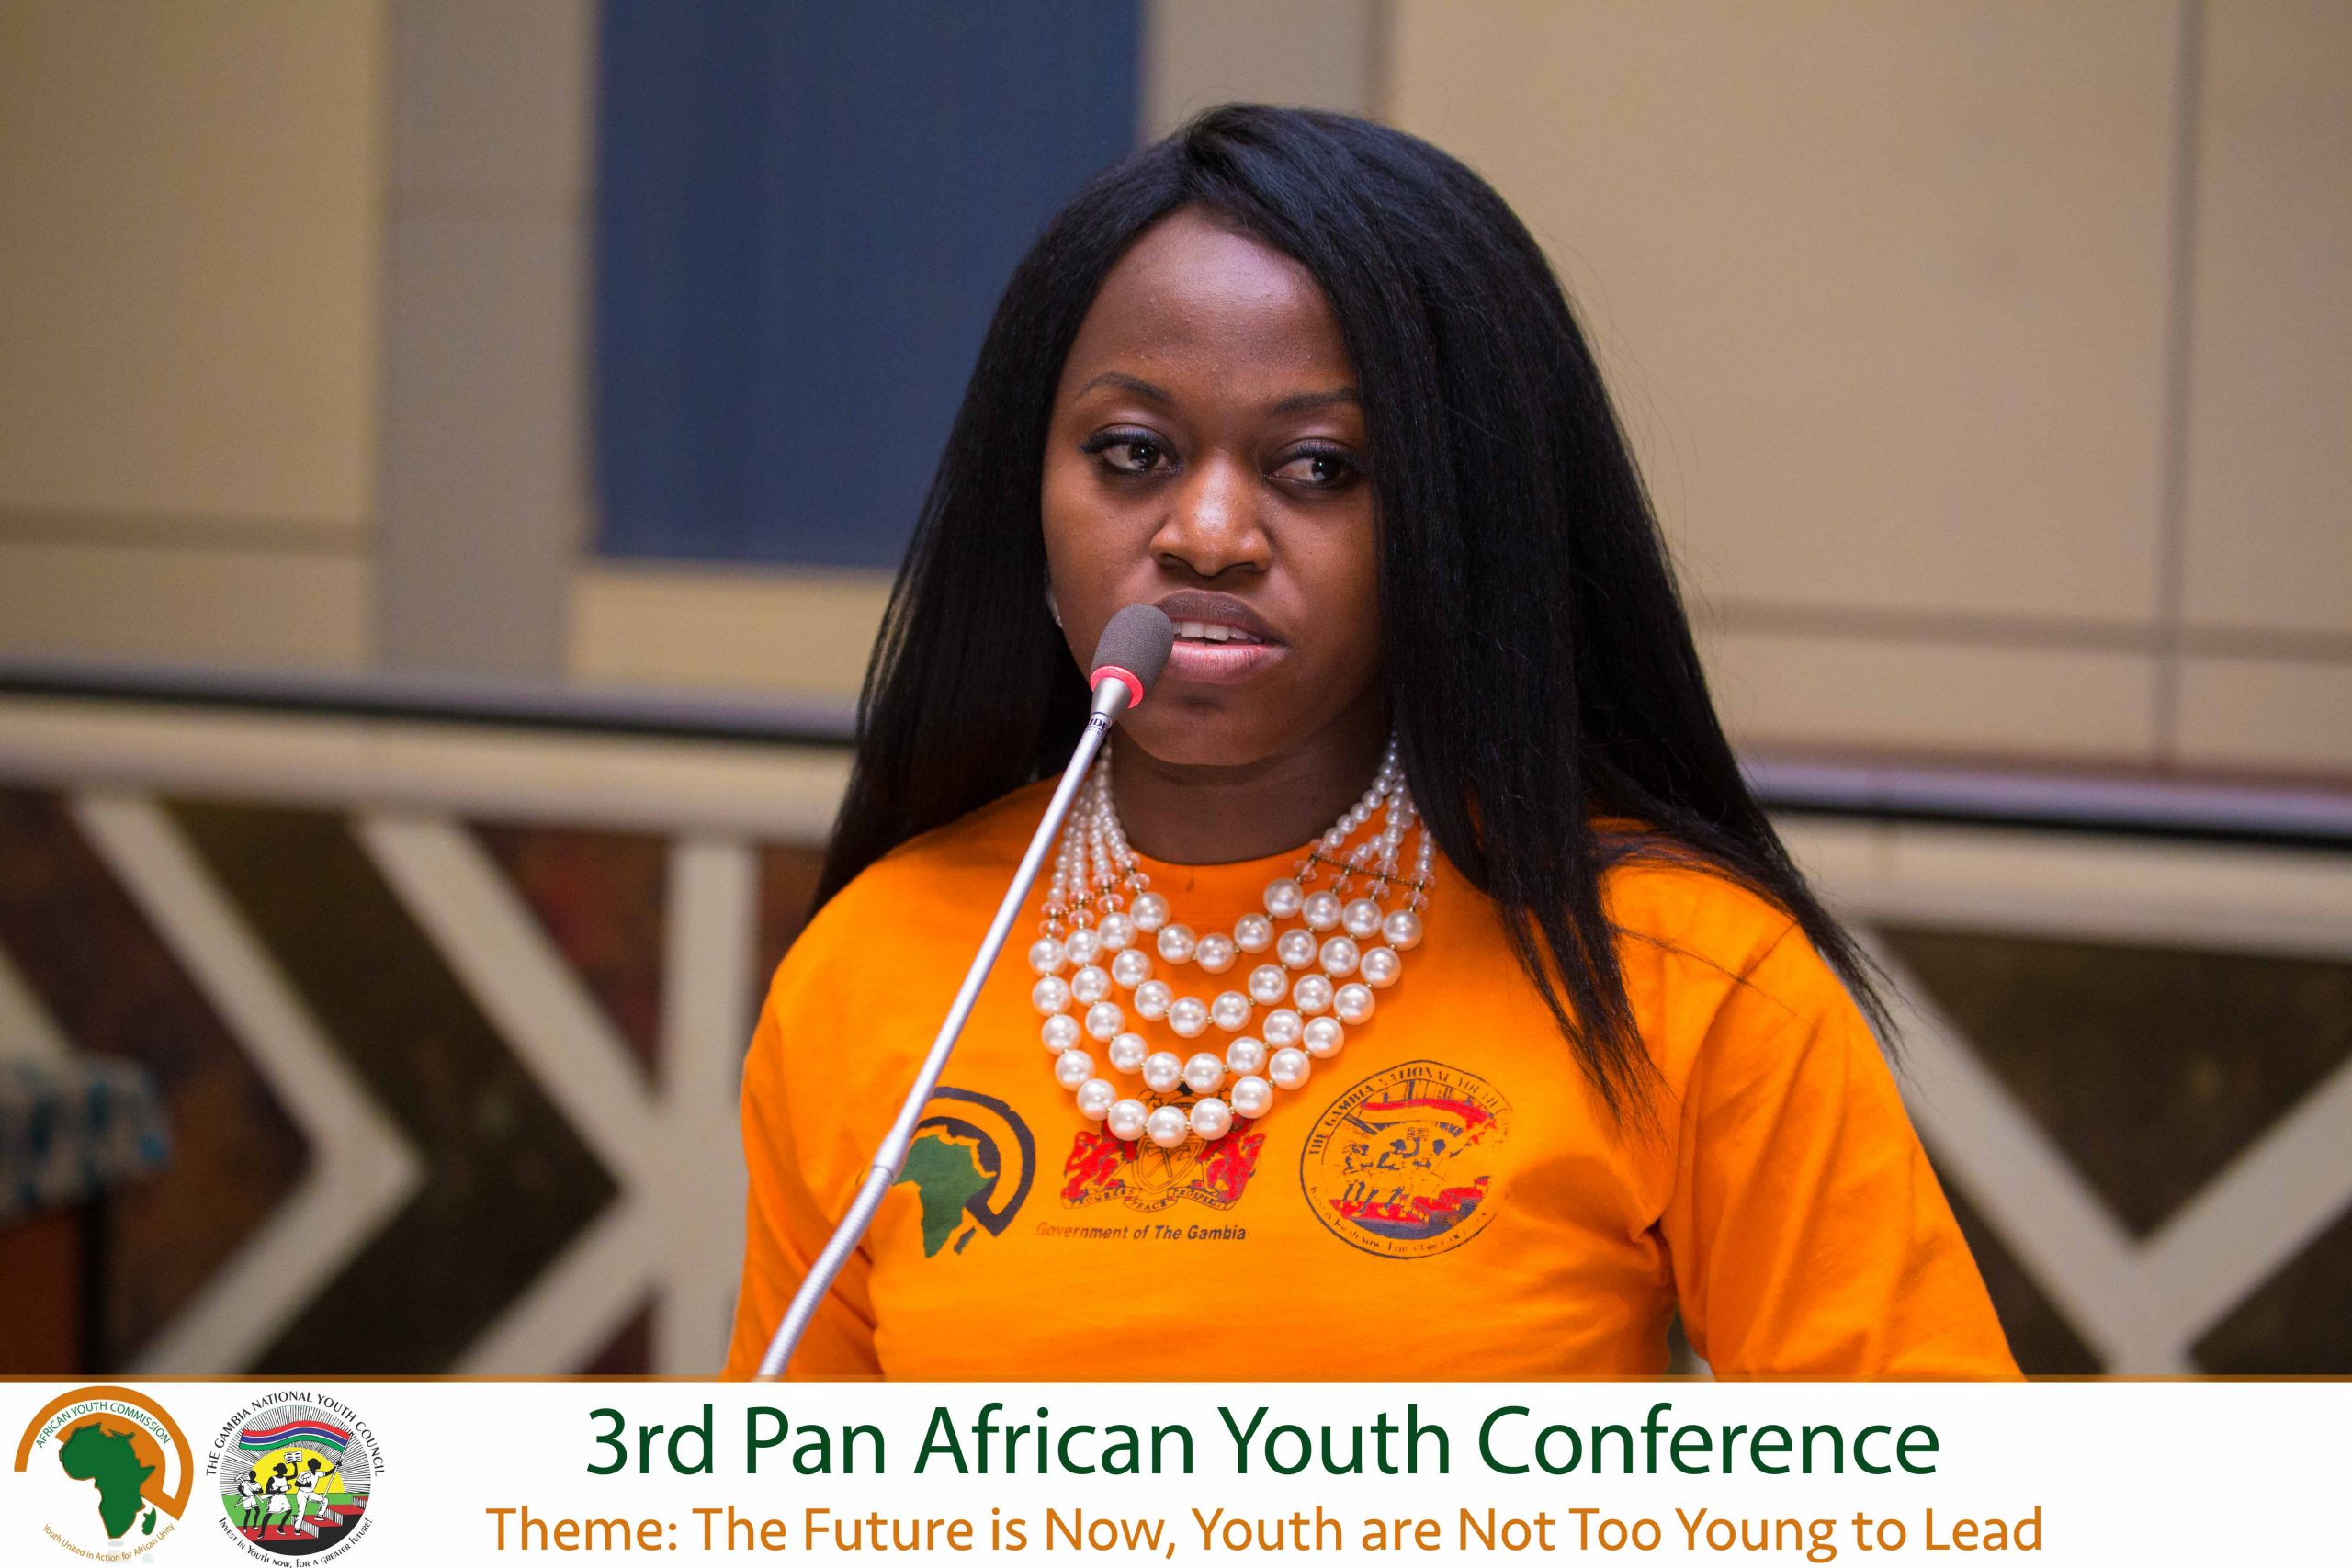 The mission of the AYC is to unite African youth in action for the promotion of African unity and development.